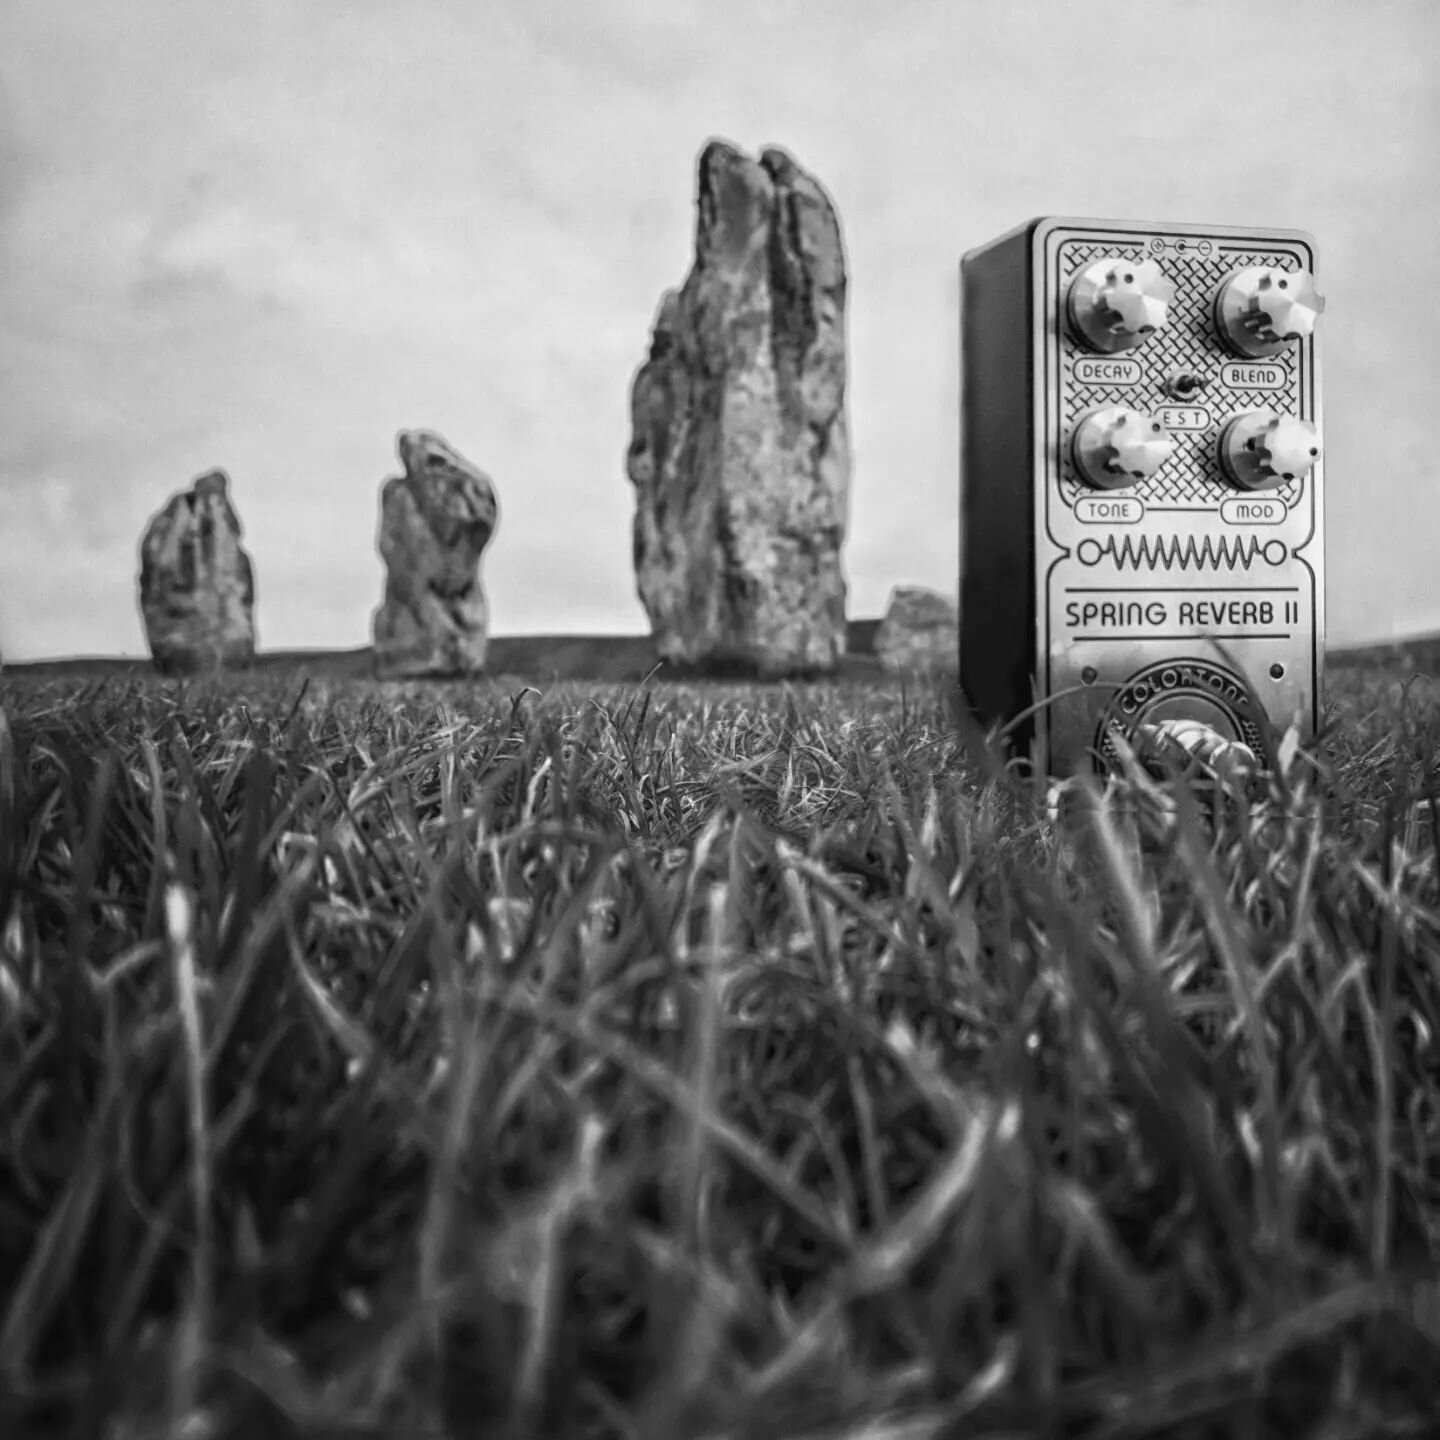 Somewhere between here and somewhere else Vol #2 
*
*
Standing tall with the giants
*
*
UK trip - Location - Avebury &amp; Salisbury Plains
*
*
*
*
#colortonepedals
#guitarpedal #effector #stompbox #guitarplayer #guitarfx #handmade #adventure #ambien